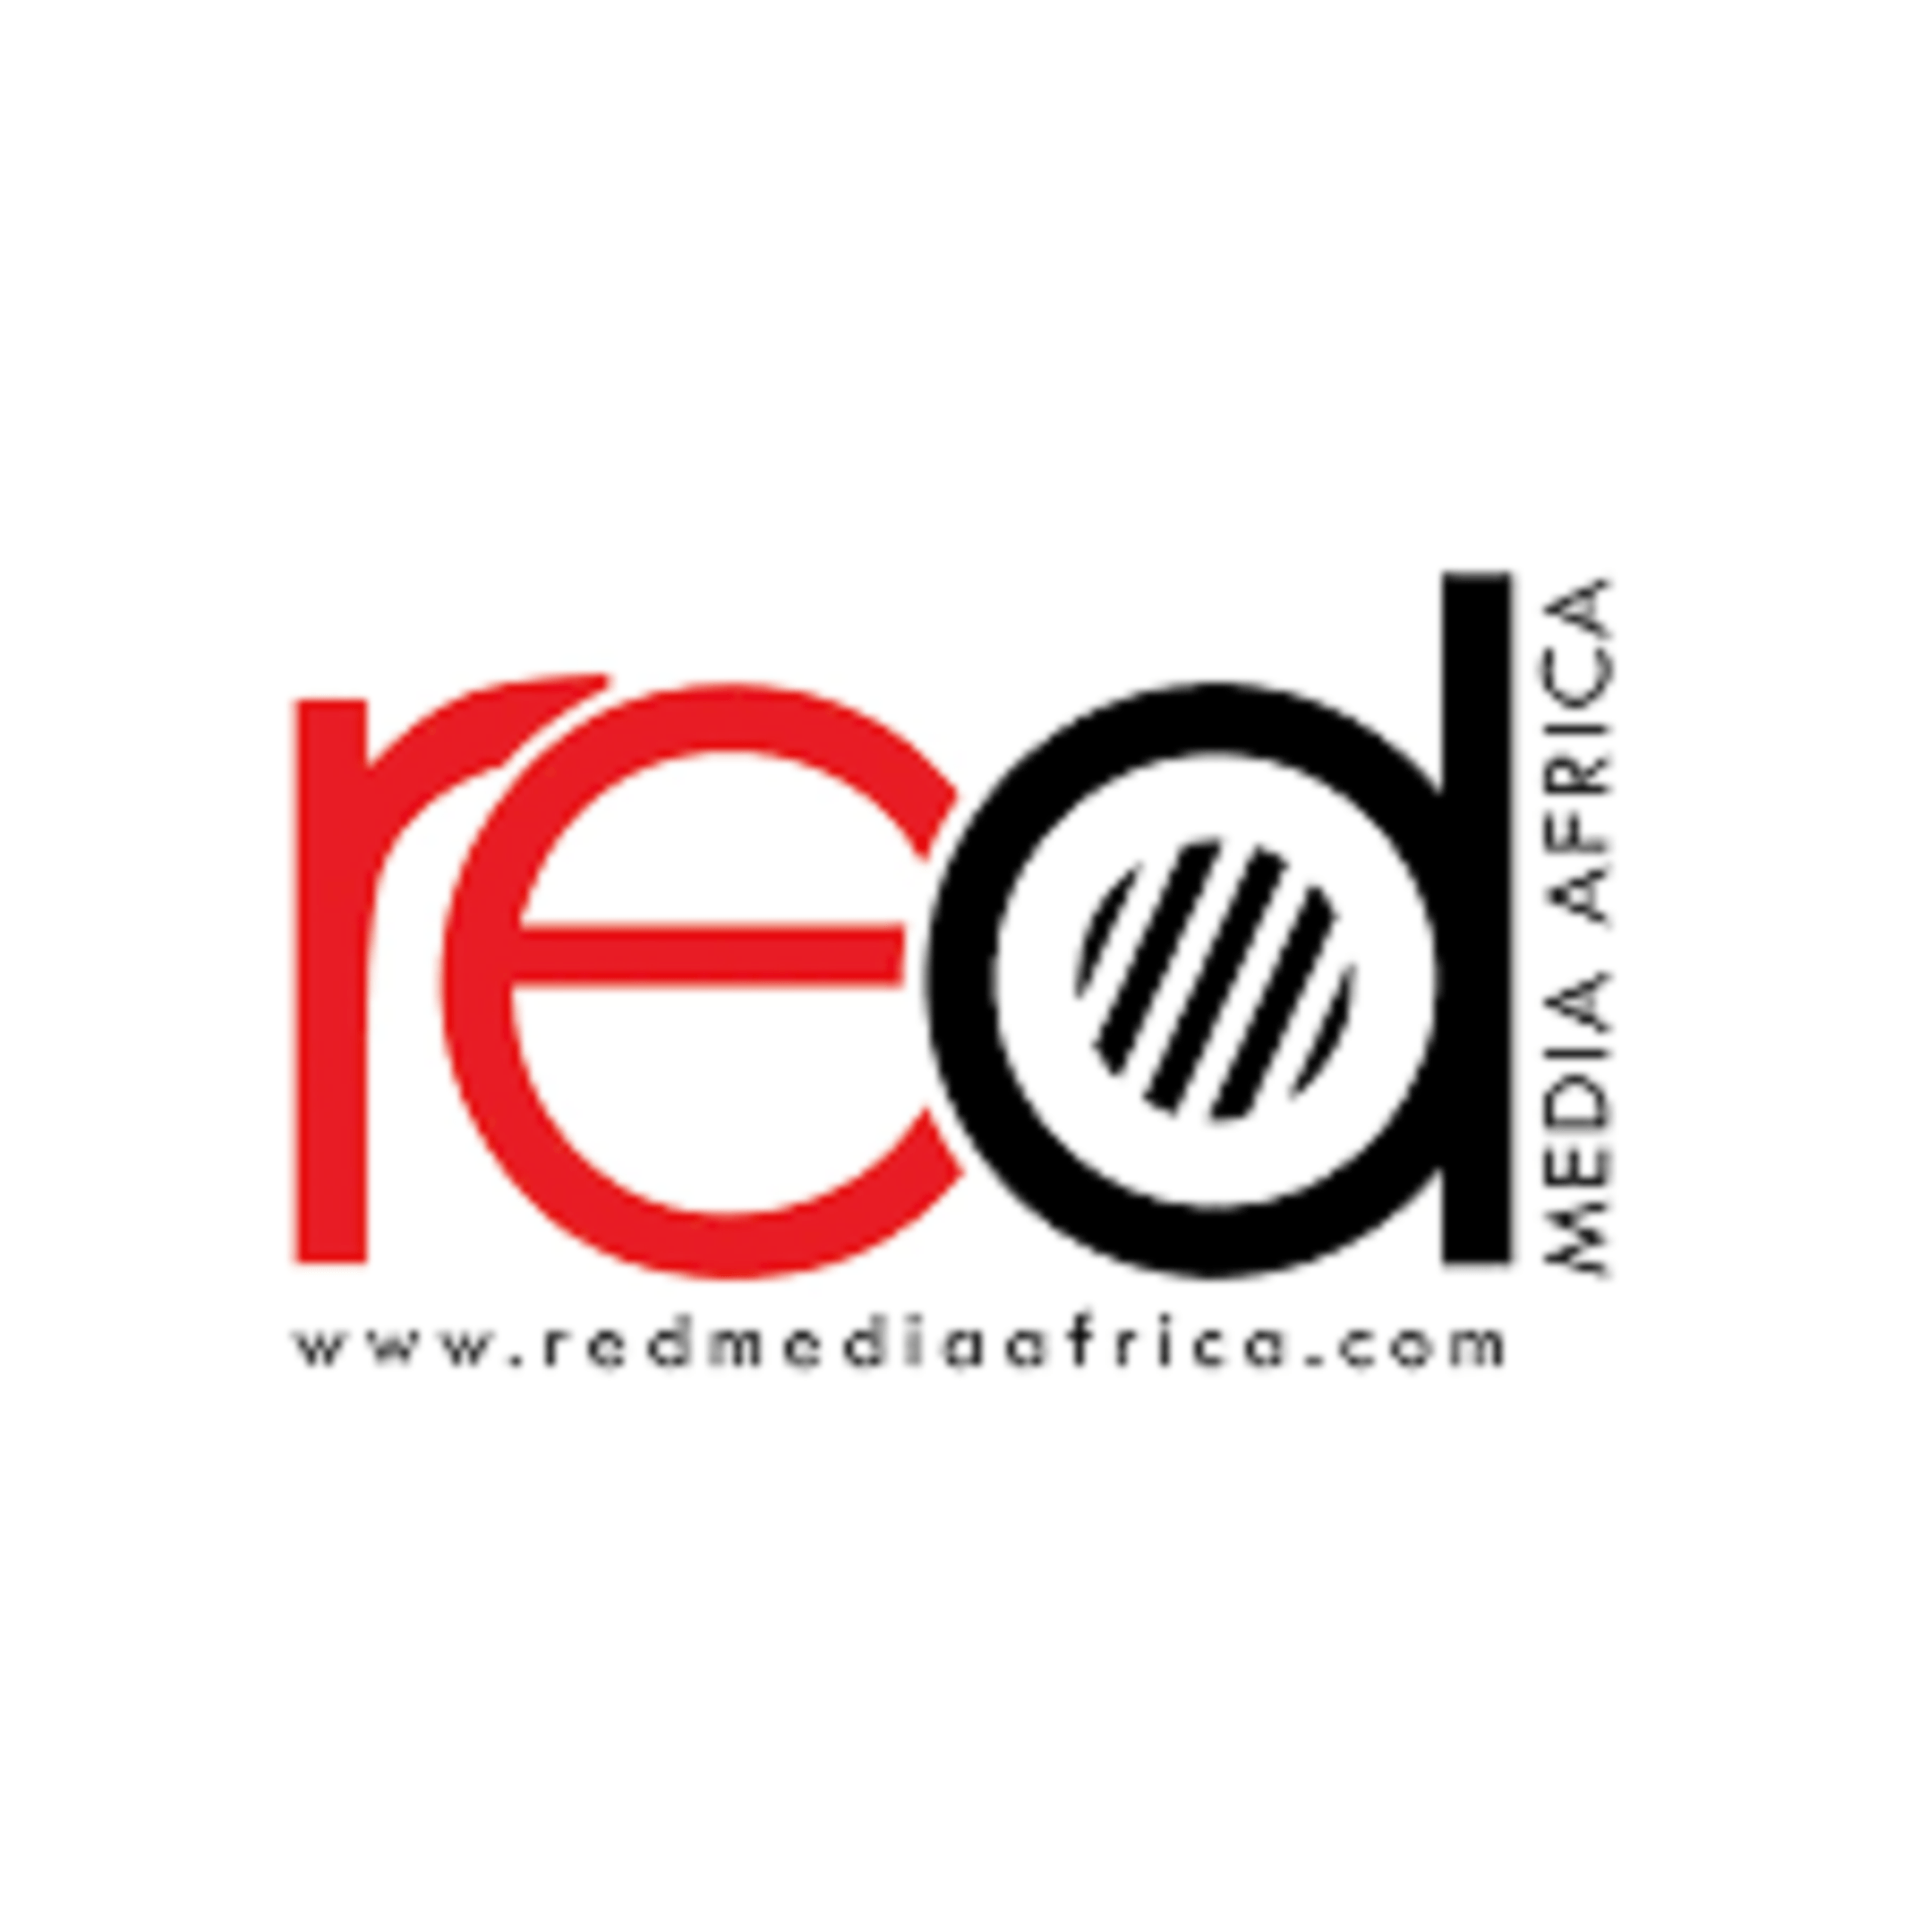 Profile with Red Oval Logo - Supporter Profile: Red Media Africa (Media Support)